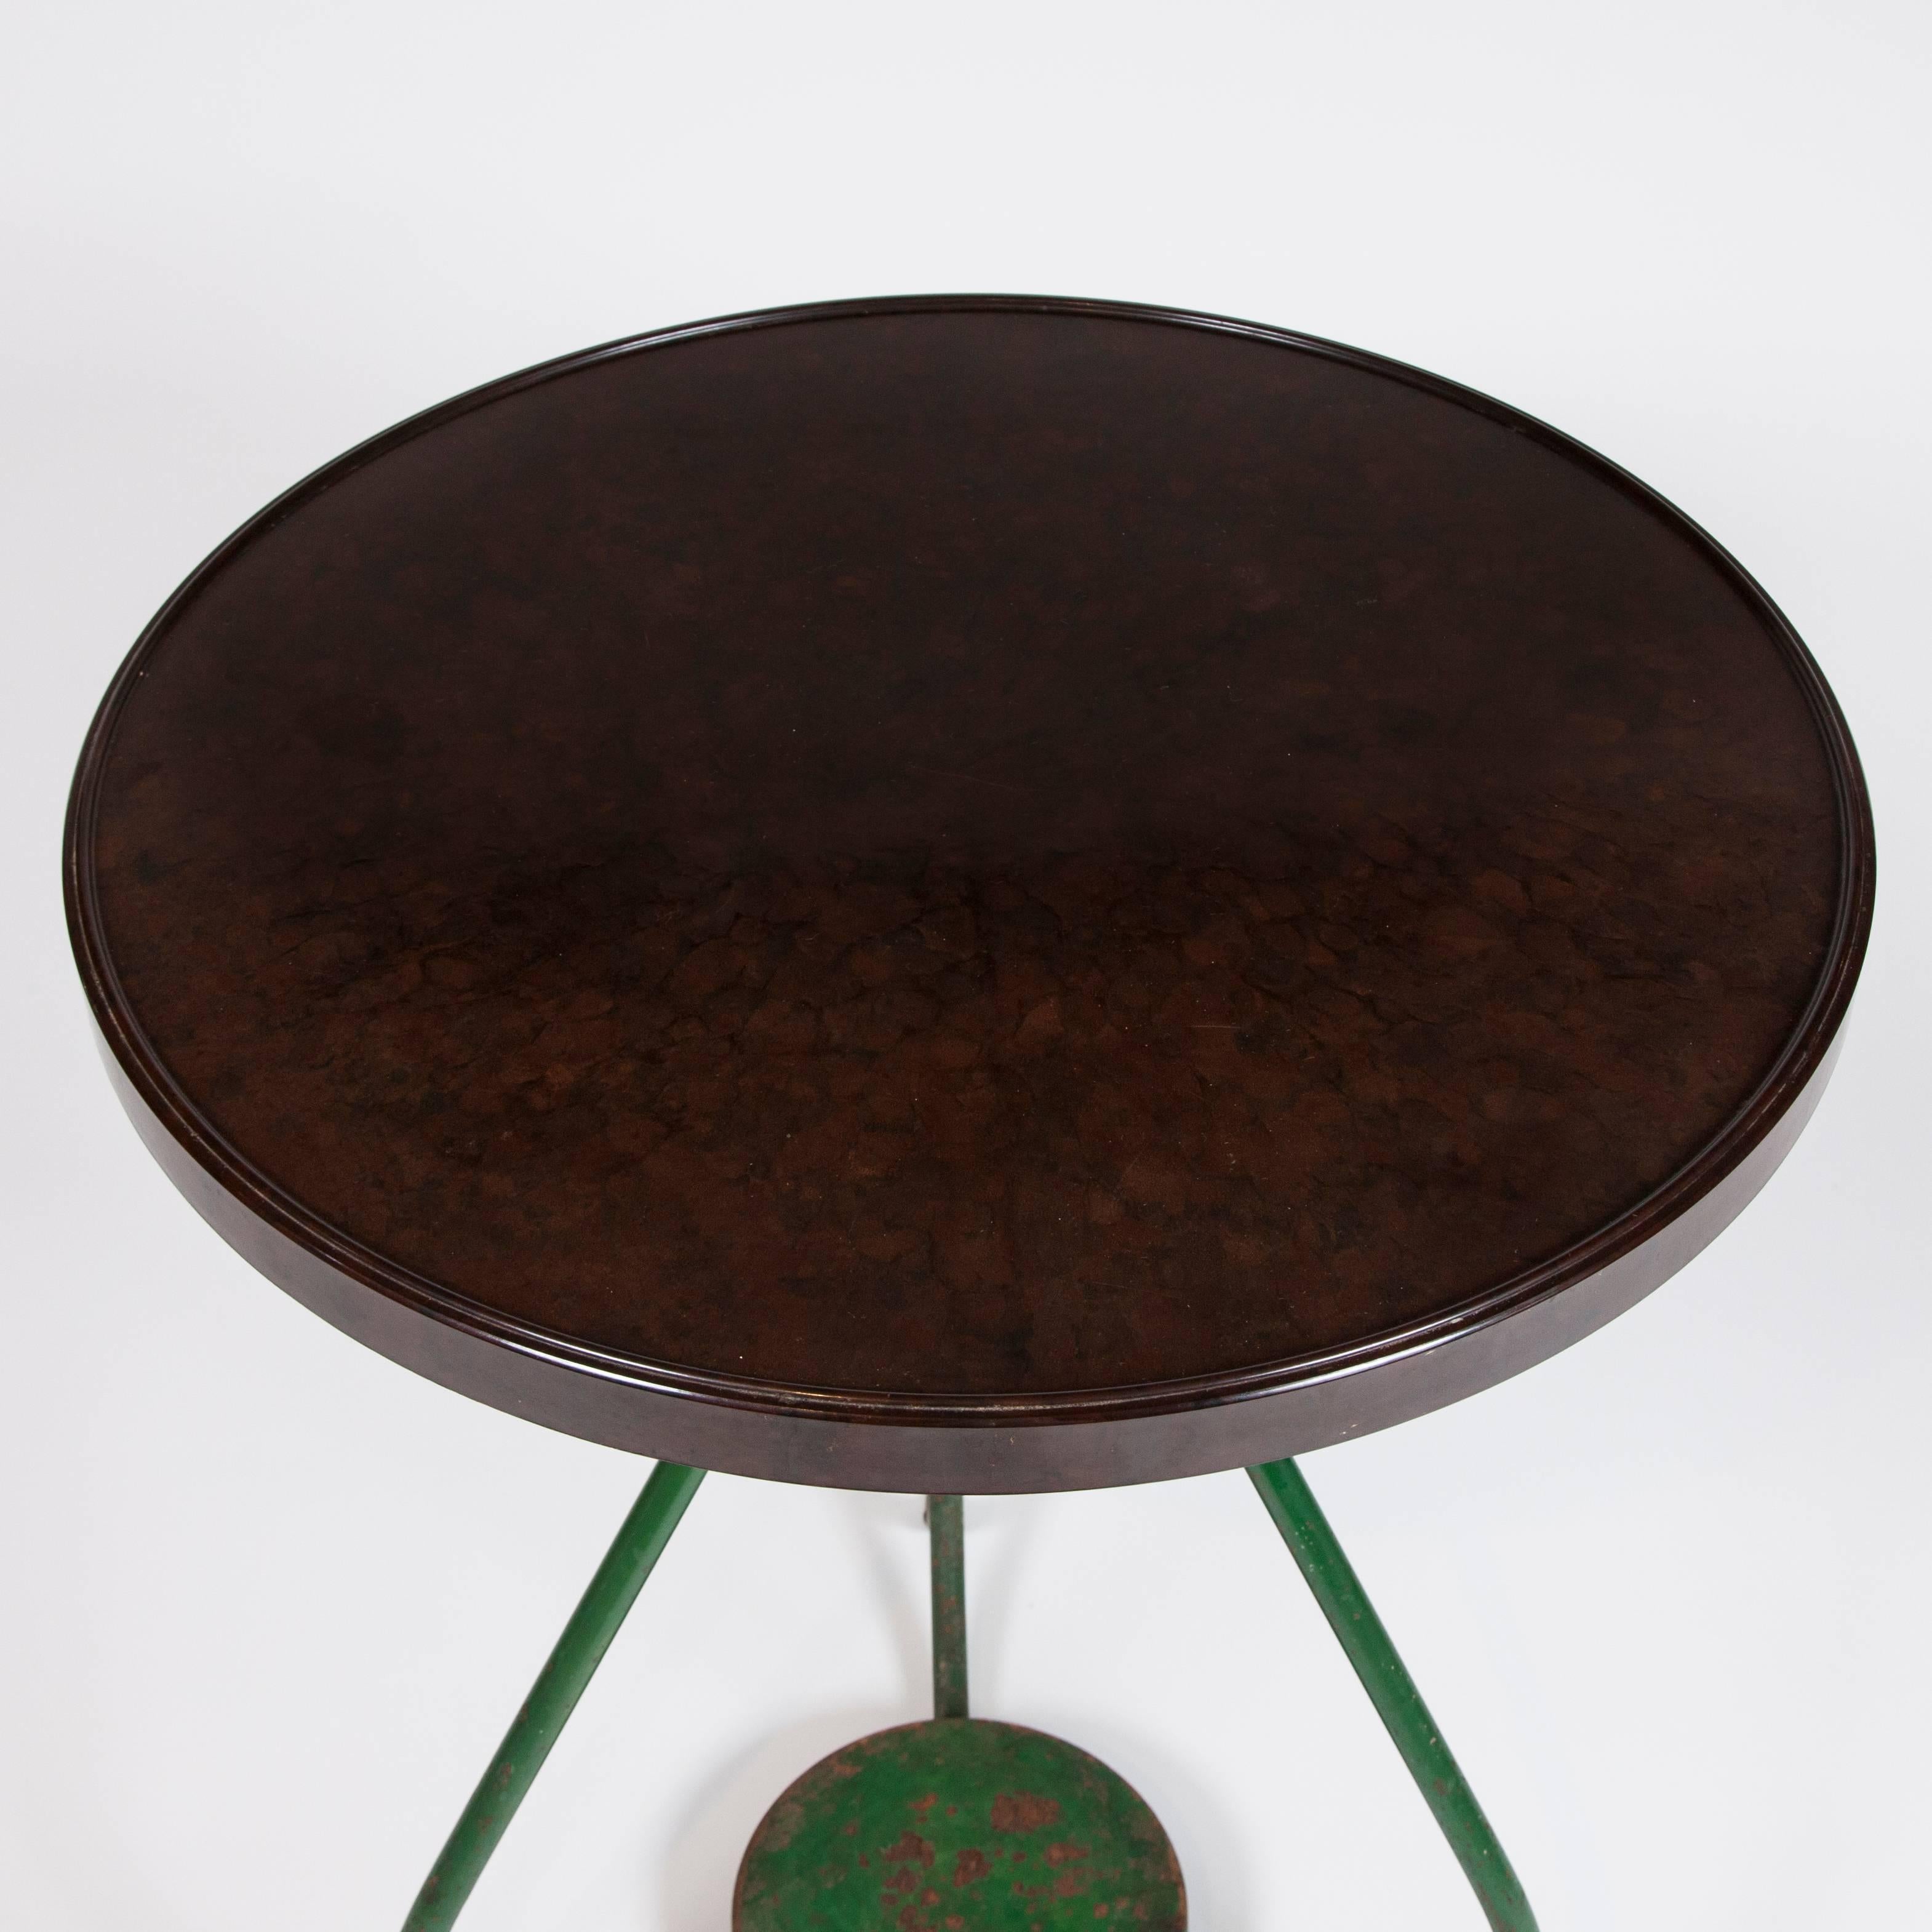 European French Bistro Table with Bakelite Top